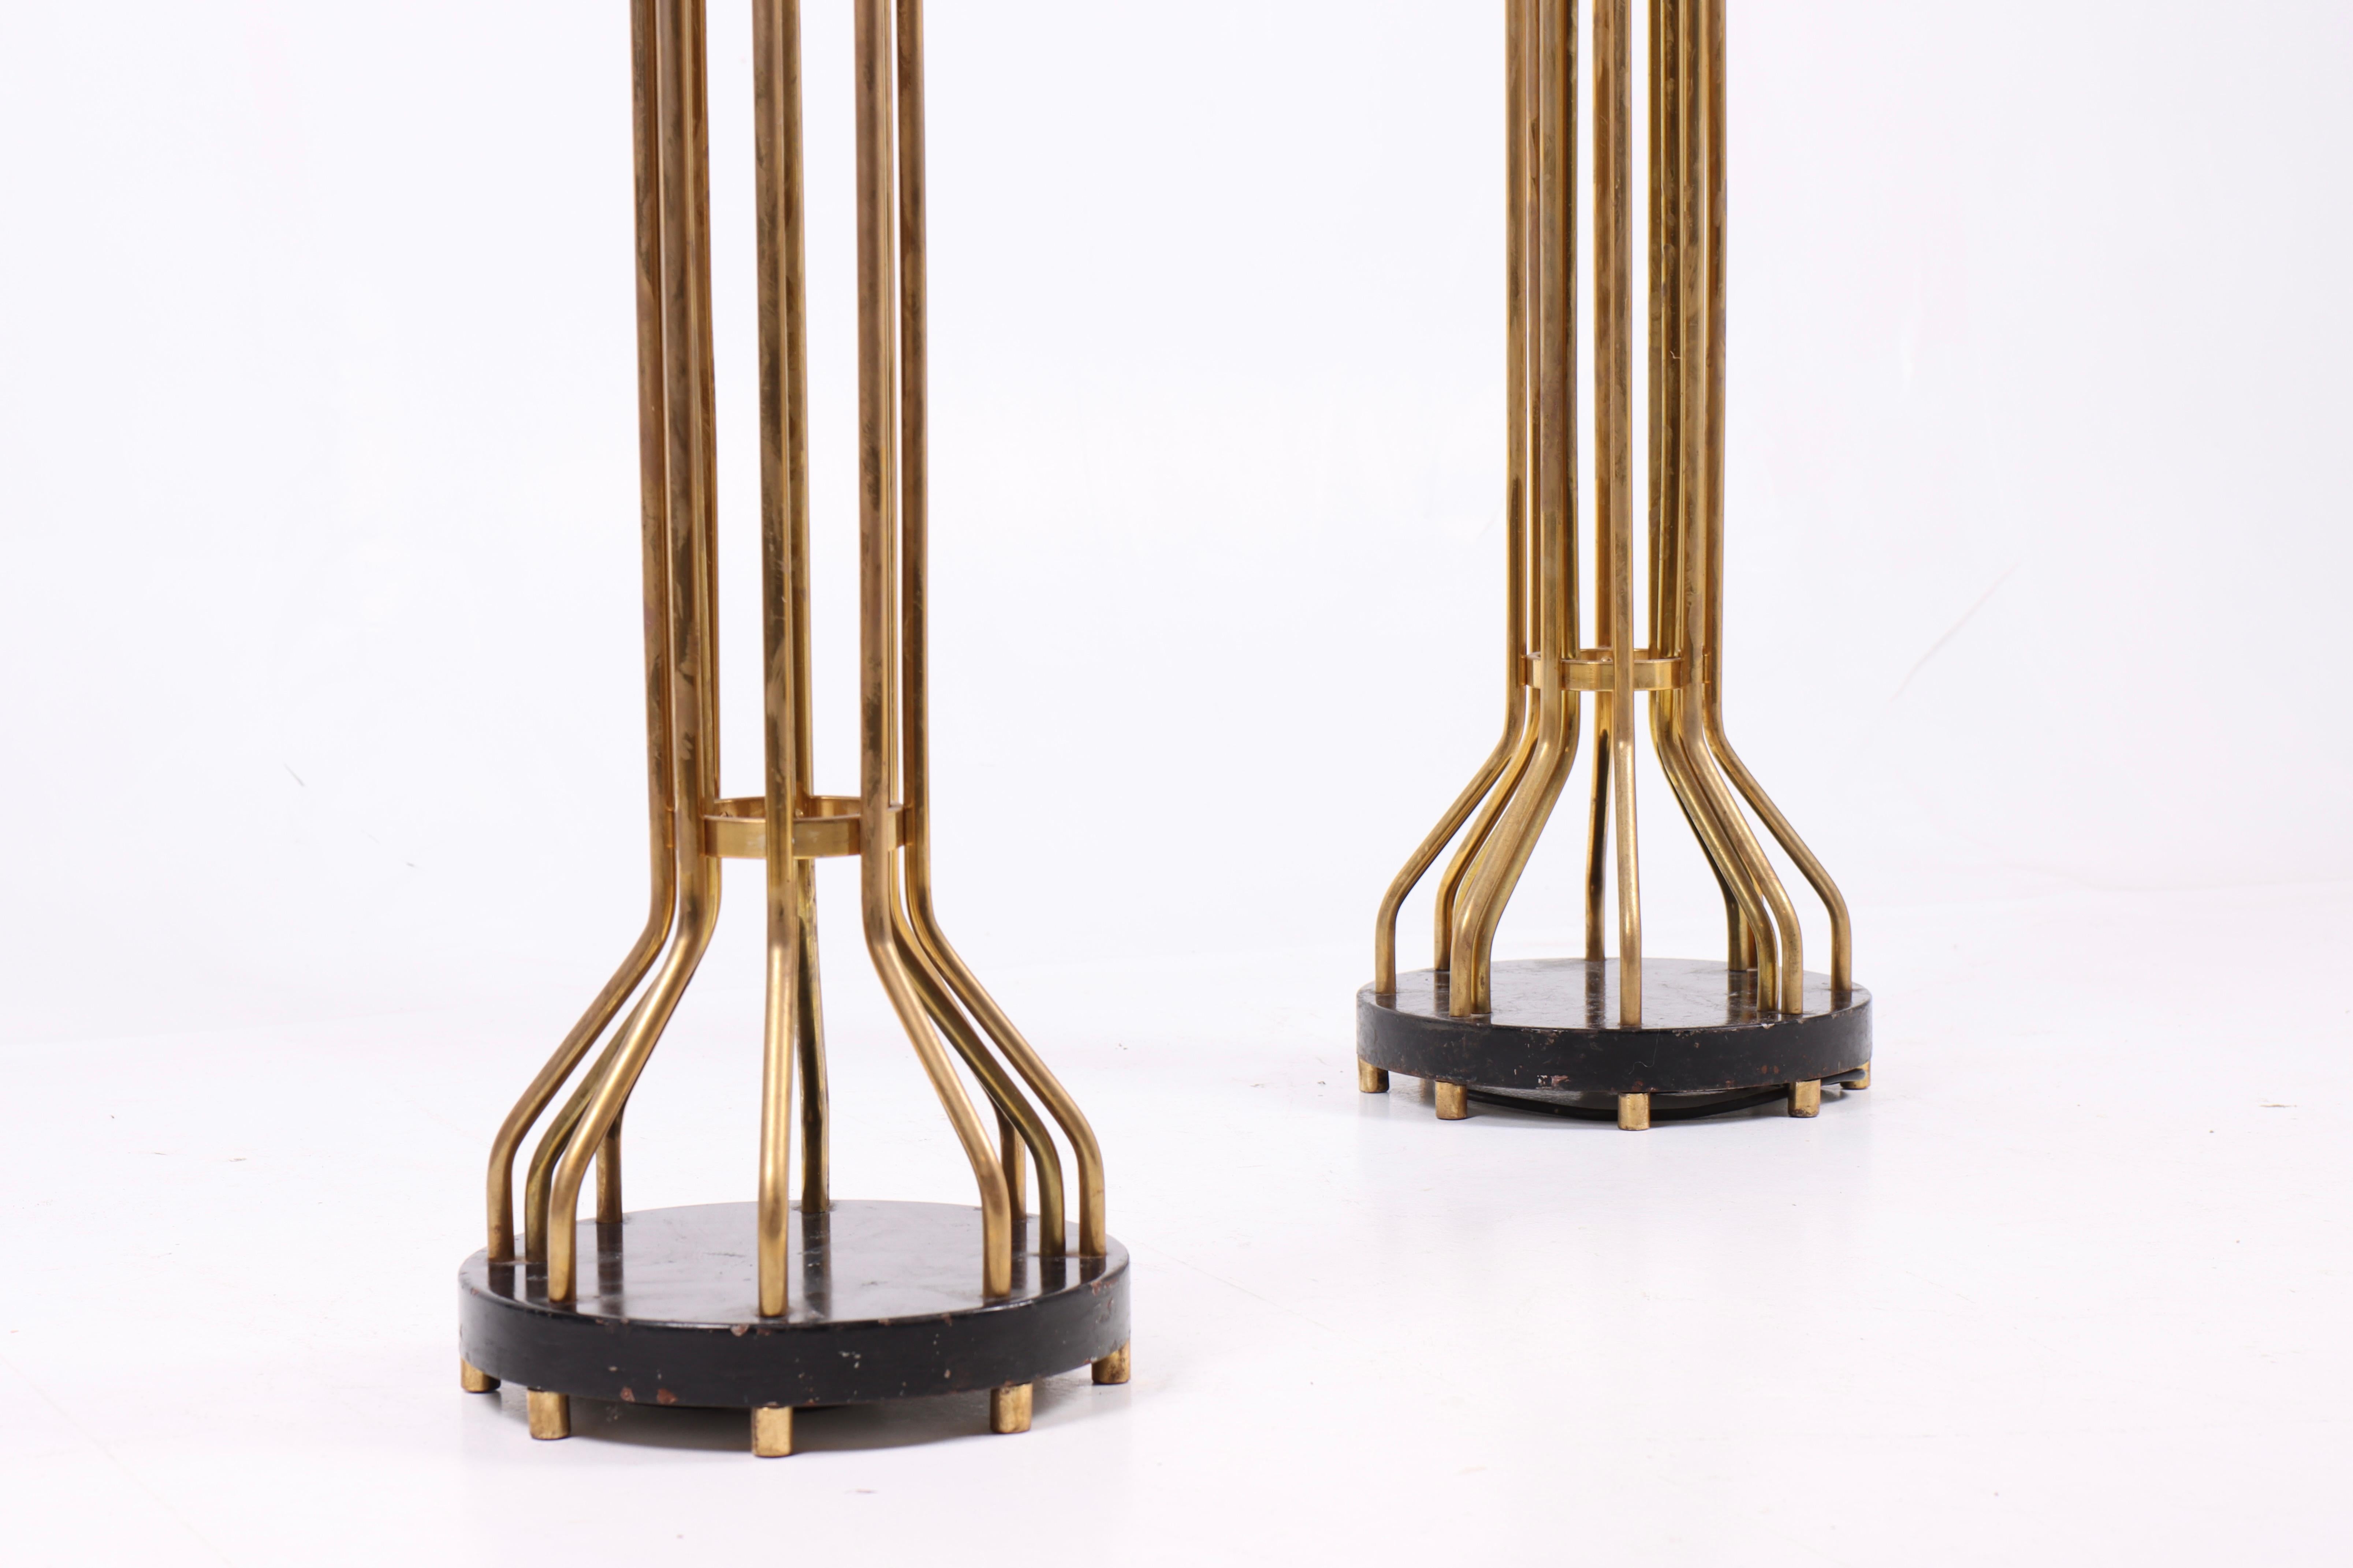 Pair of Midcentury Floor Lamps in Patinated Brass, Made in Denmark, 1950s In Good Condition For Sale In Lejre, DK